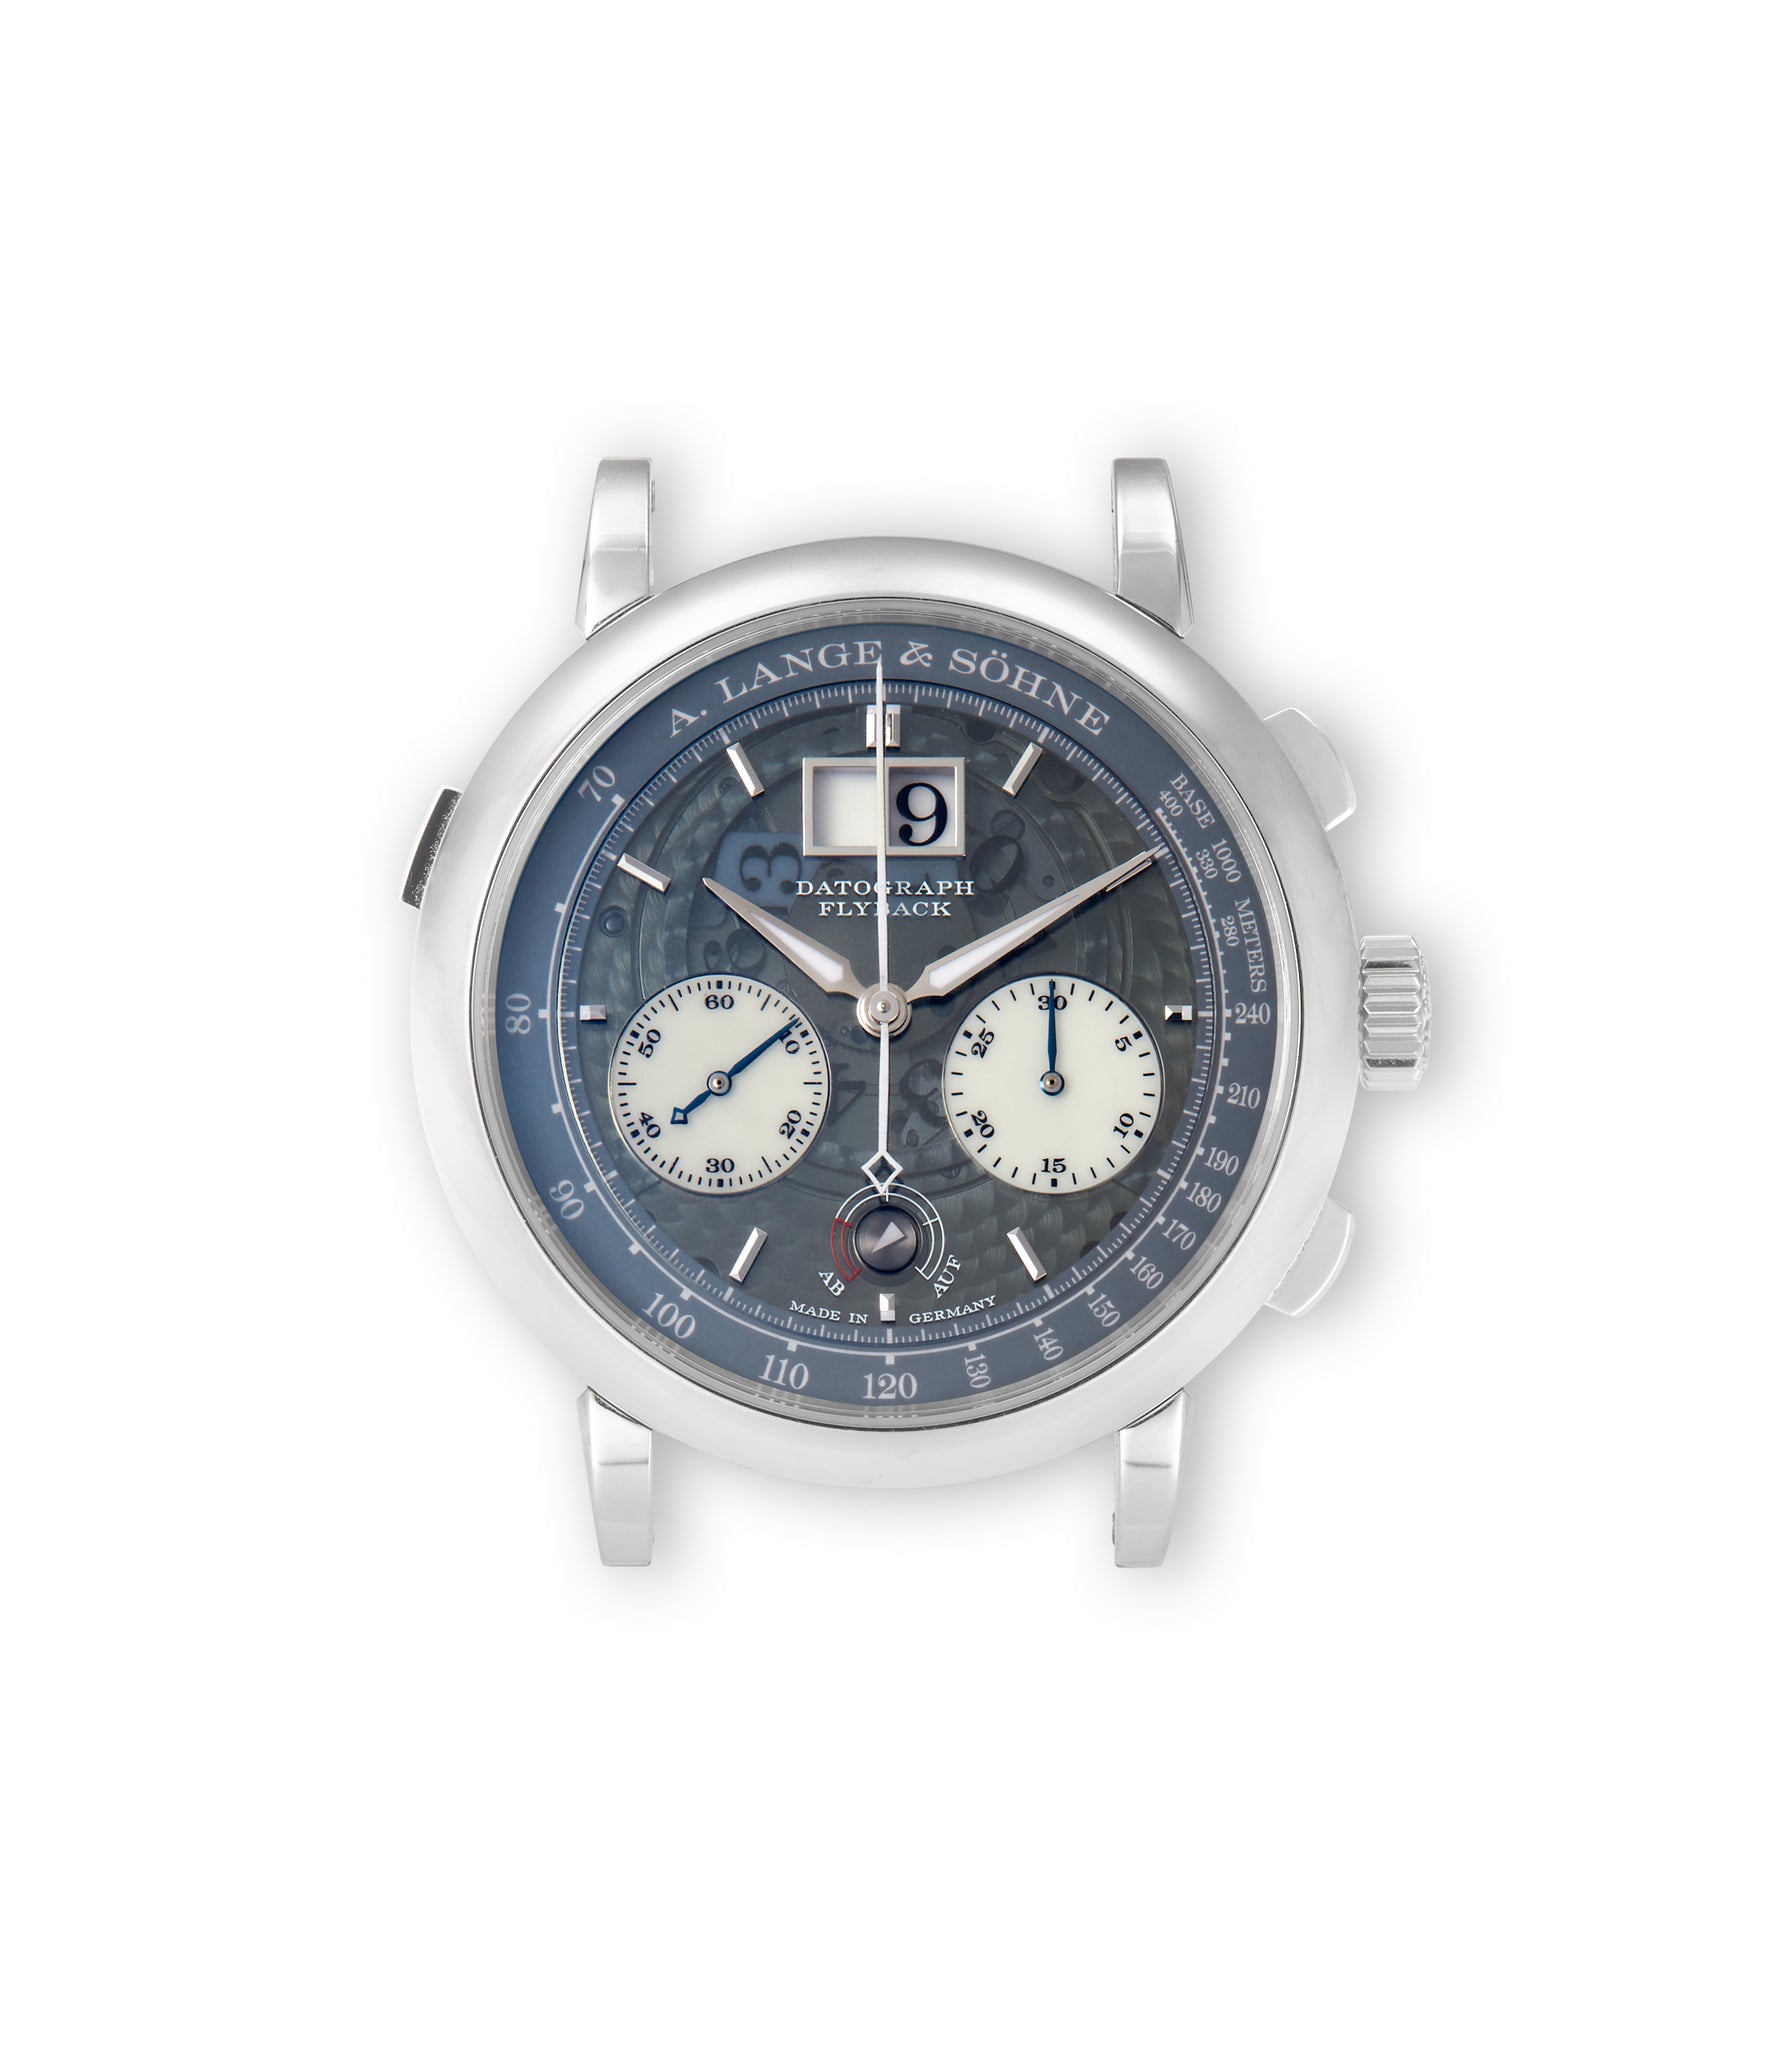 buy A. Lange & Söhne Datograph Up/Down Lumen 405.034 Platinum preowned watch at A Collected Man London